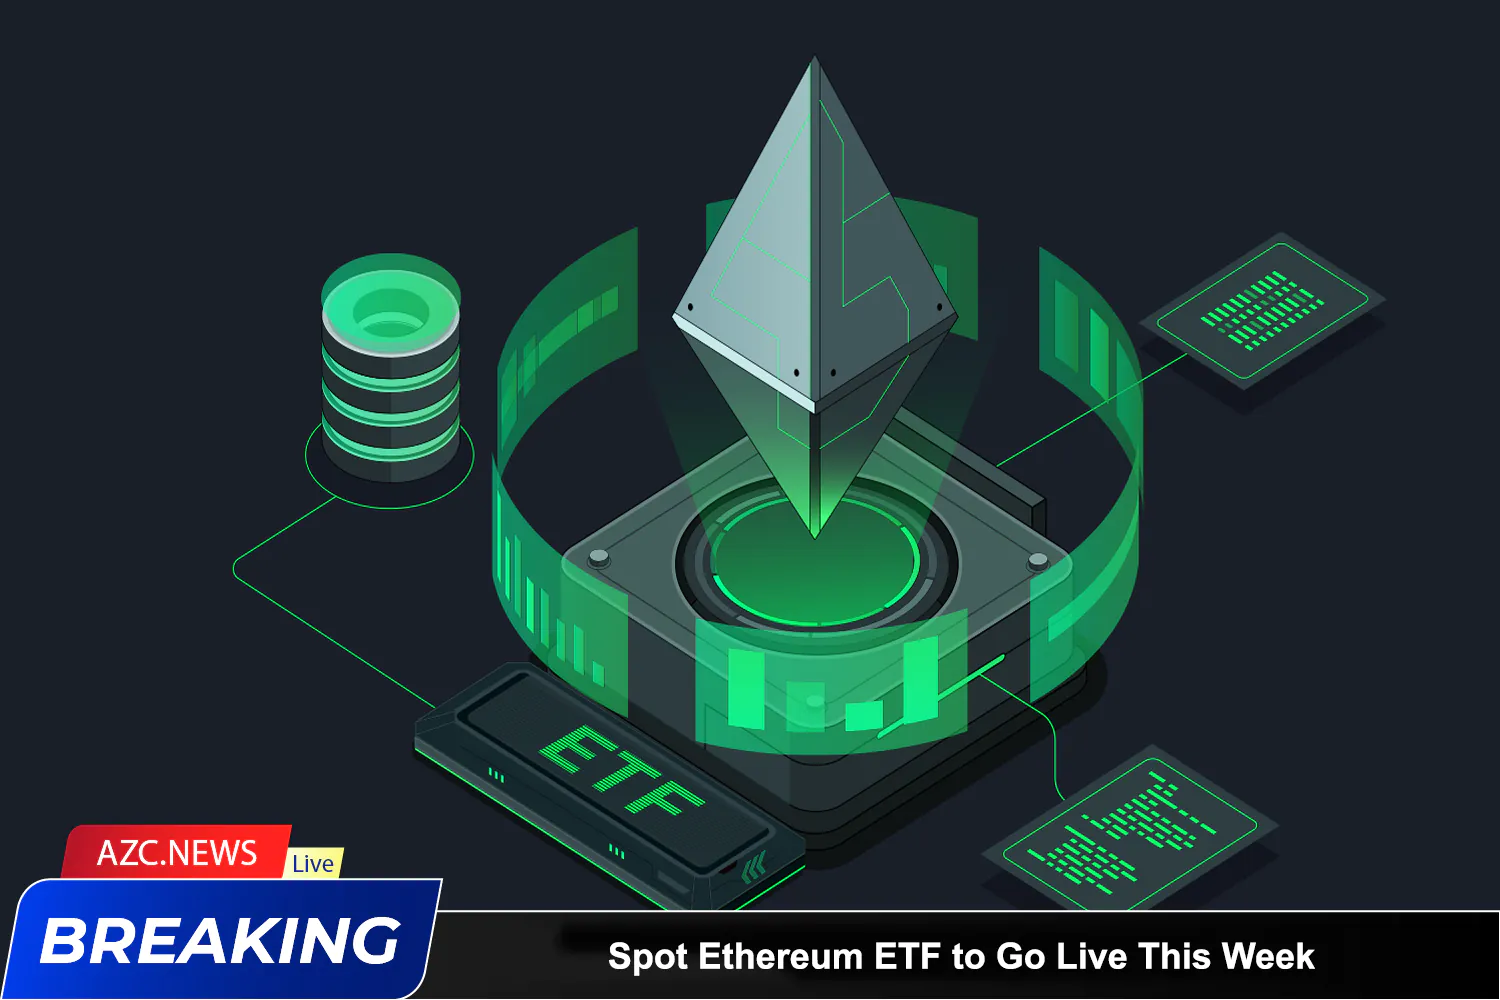 Azcnews Spot Ethereum Etf To Go Live This Week